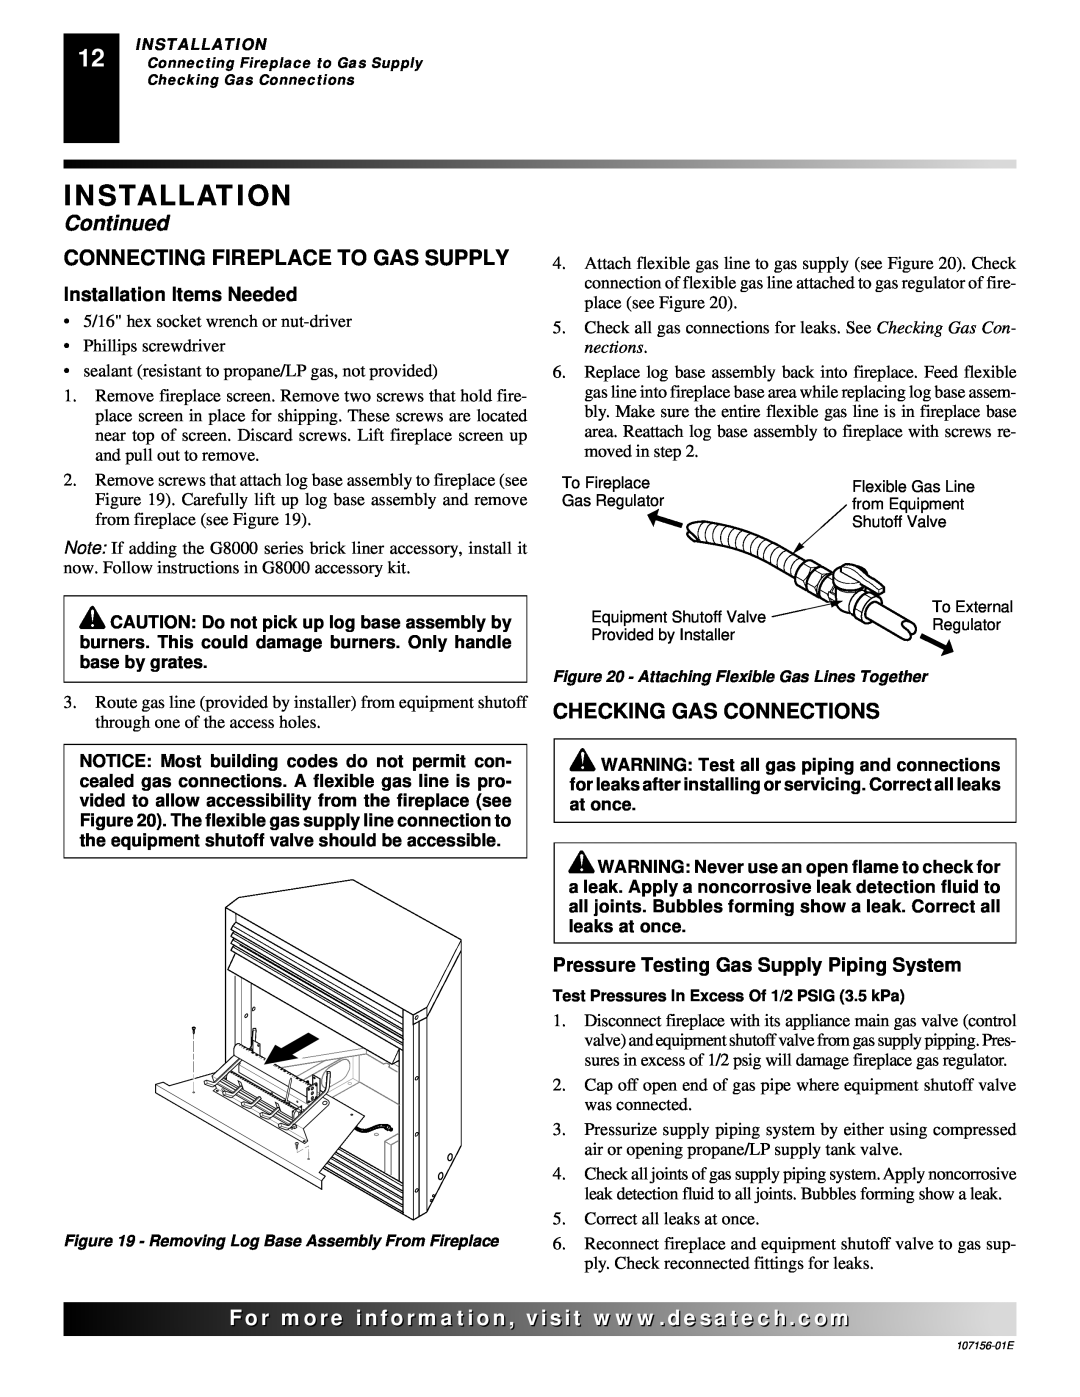 Vanguard Heating 107156-01E.pdf Connecting Fireplace To Gas Supply, Checking Gas Connections, Installation, Continued 